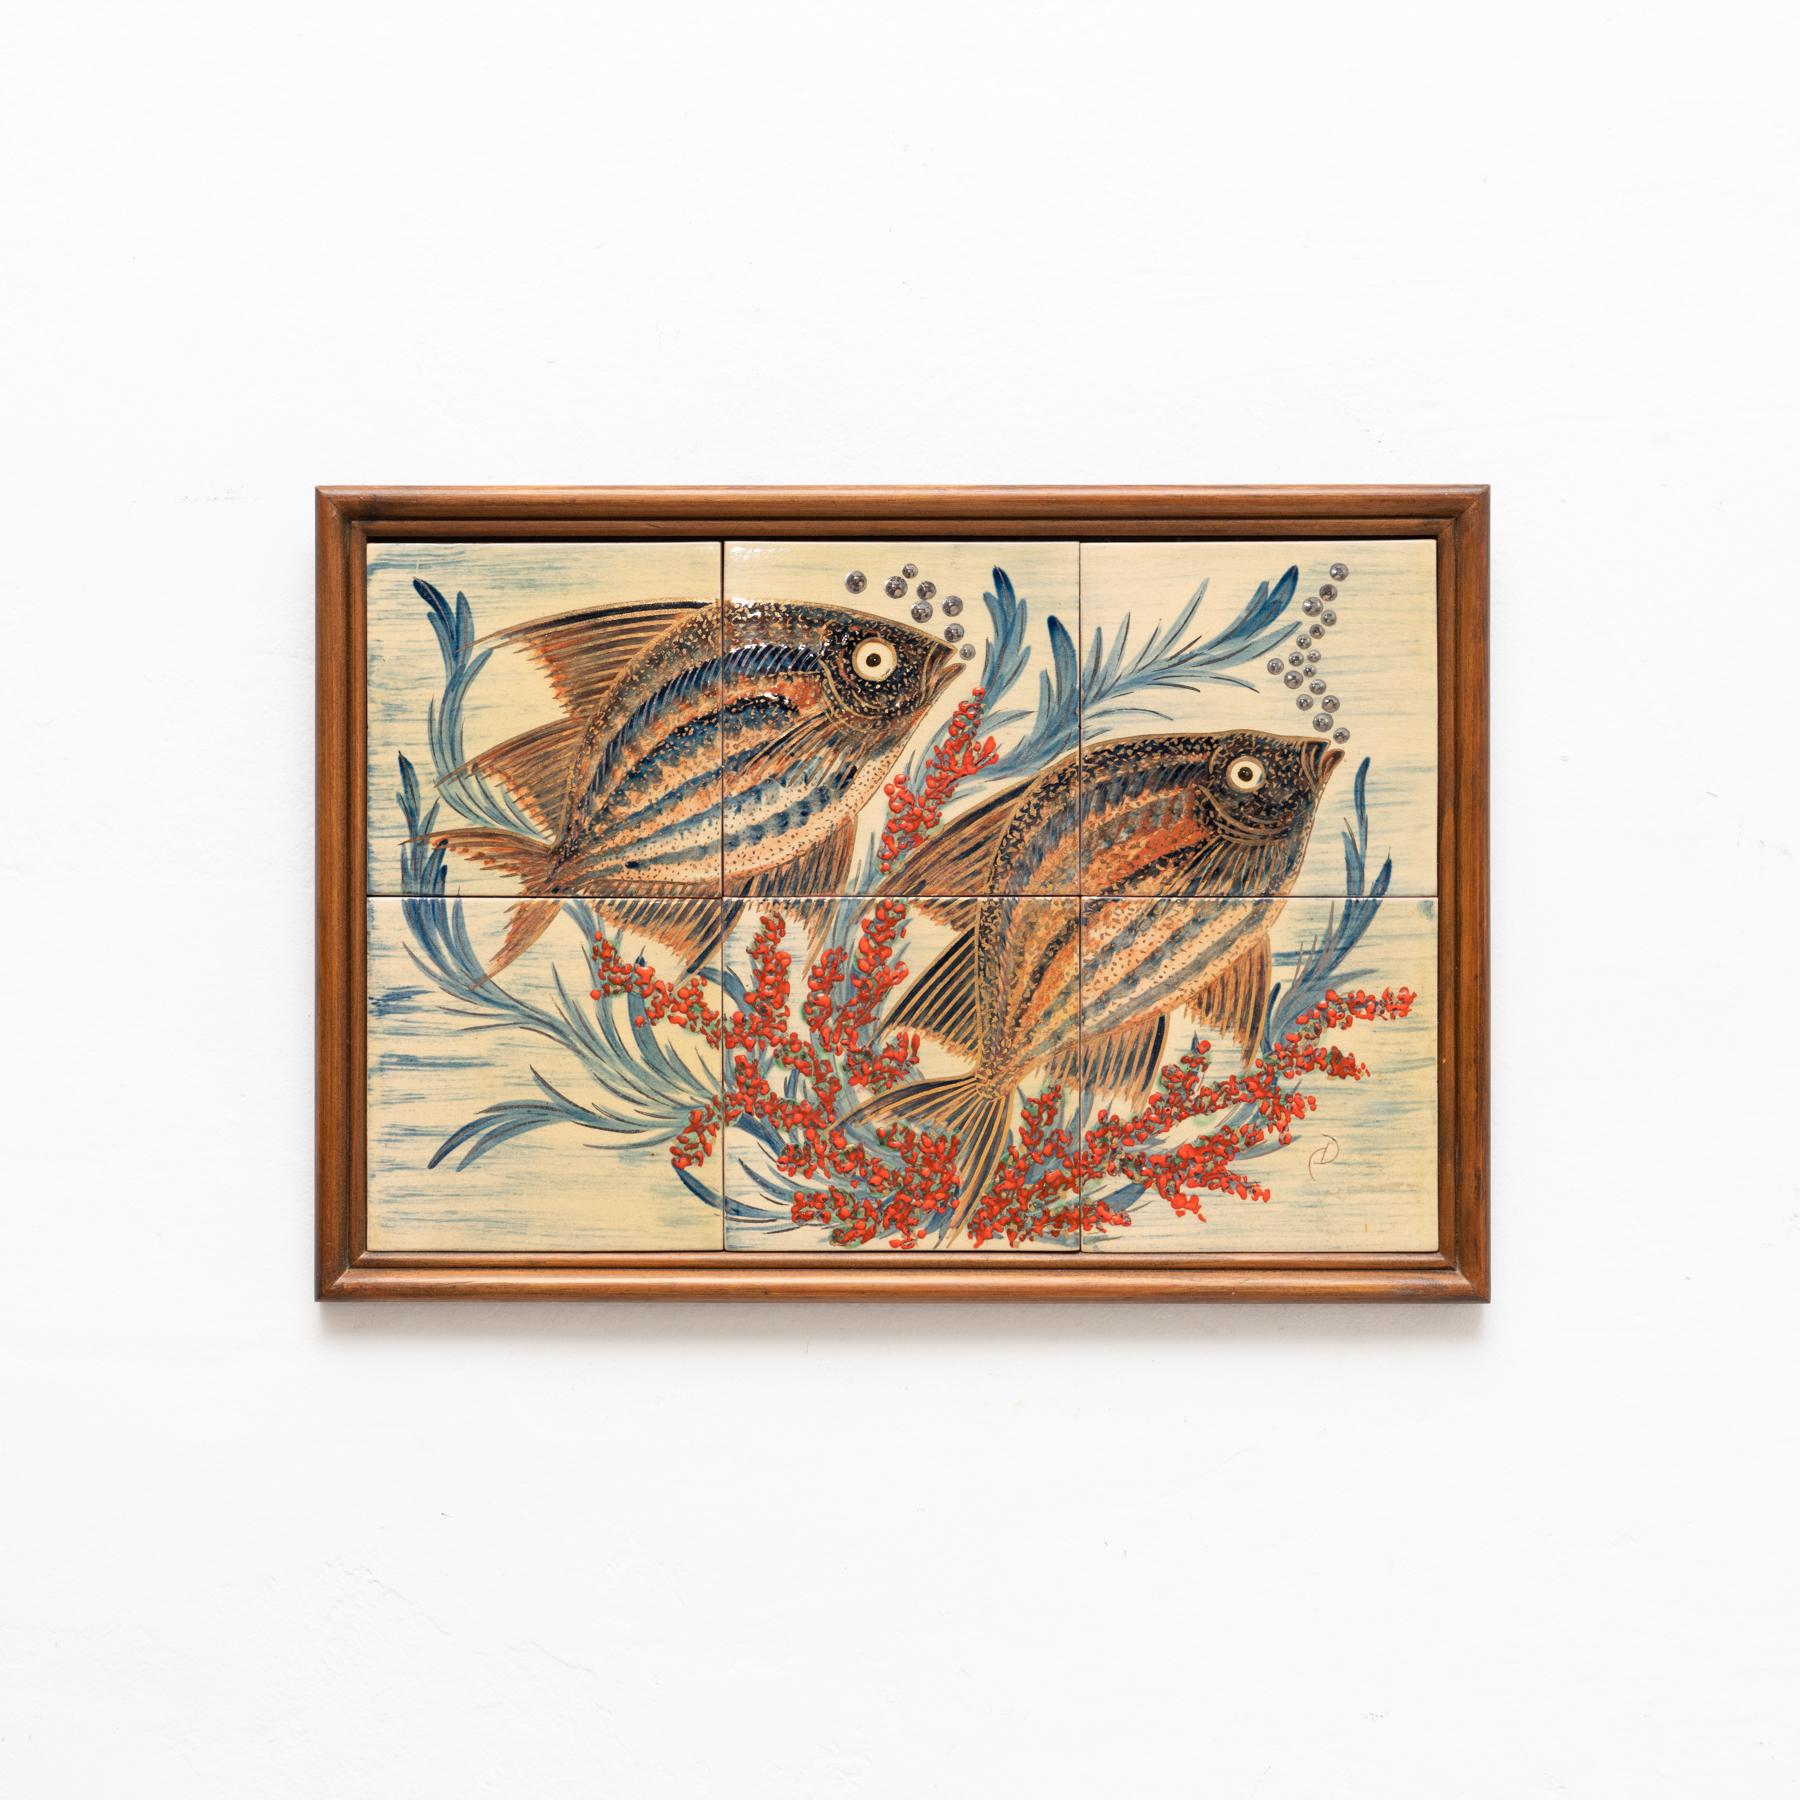 Ceramic hand painted artwork of two fishes by Catalan artist Diaz Costa, circa 1960.
Framed. Signed.

In original condition, with minor wear consistent of age and use, preserving a beautiul patina.